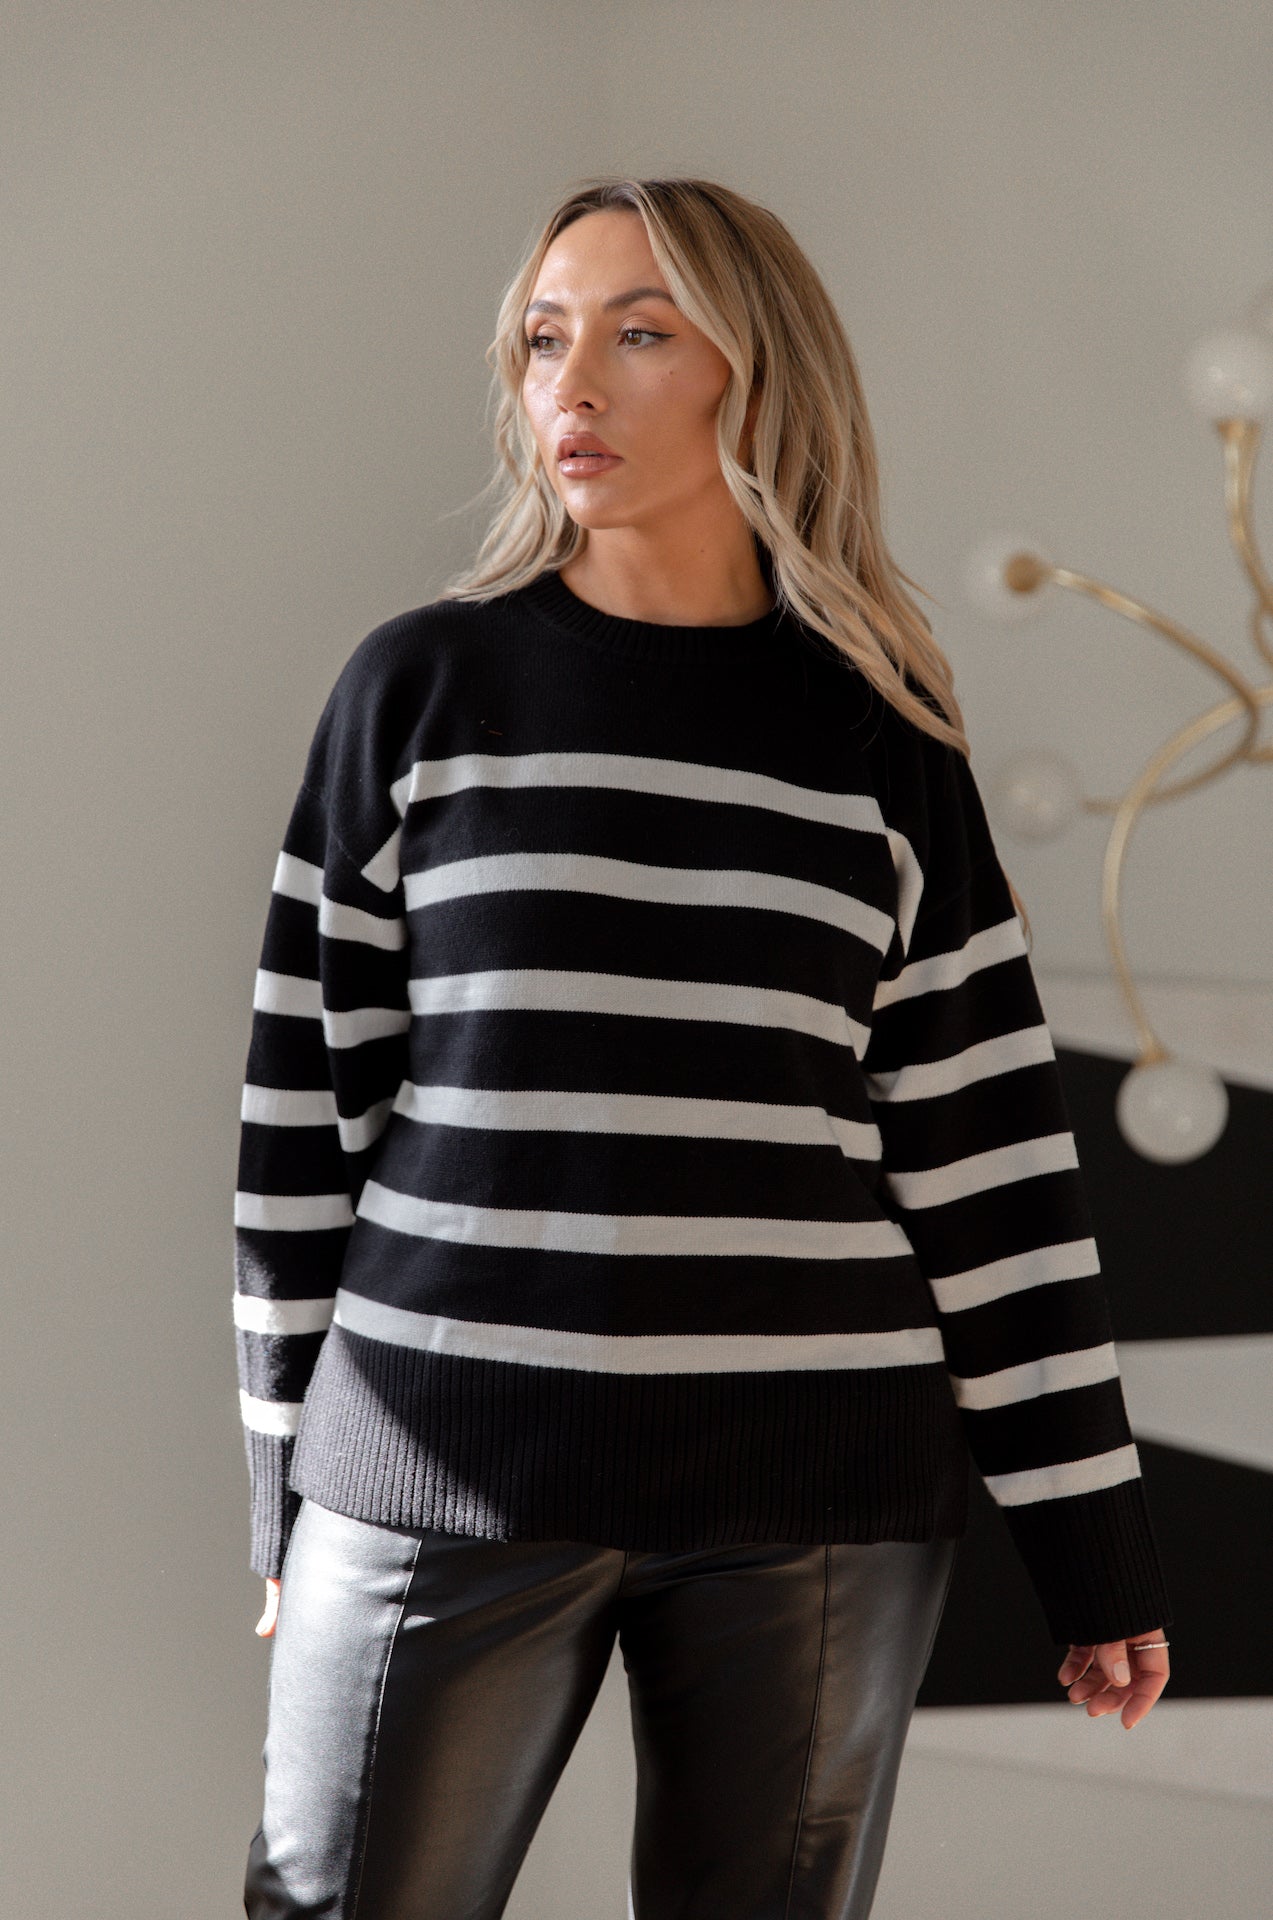 crewneck black and white striped sweater for women